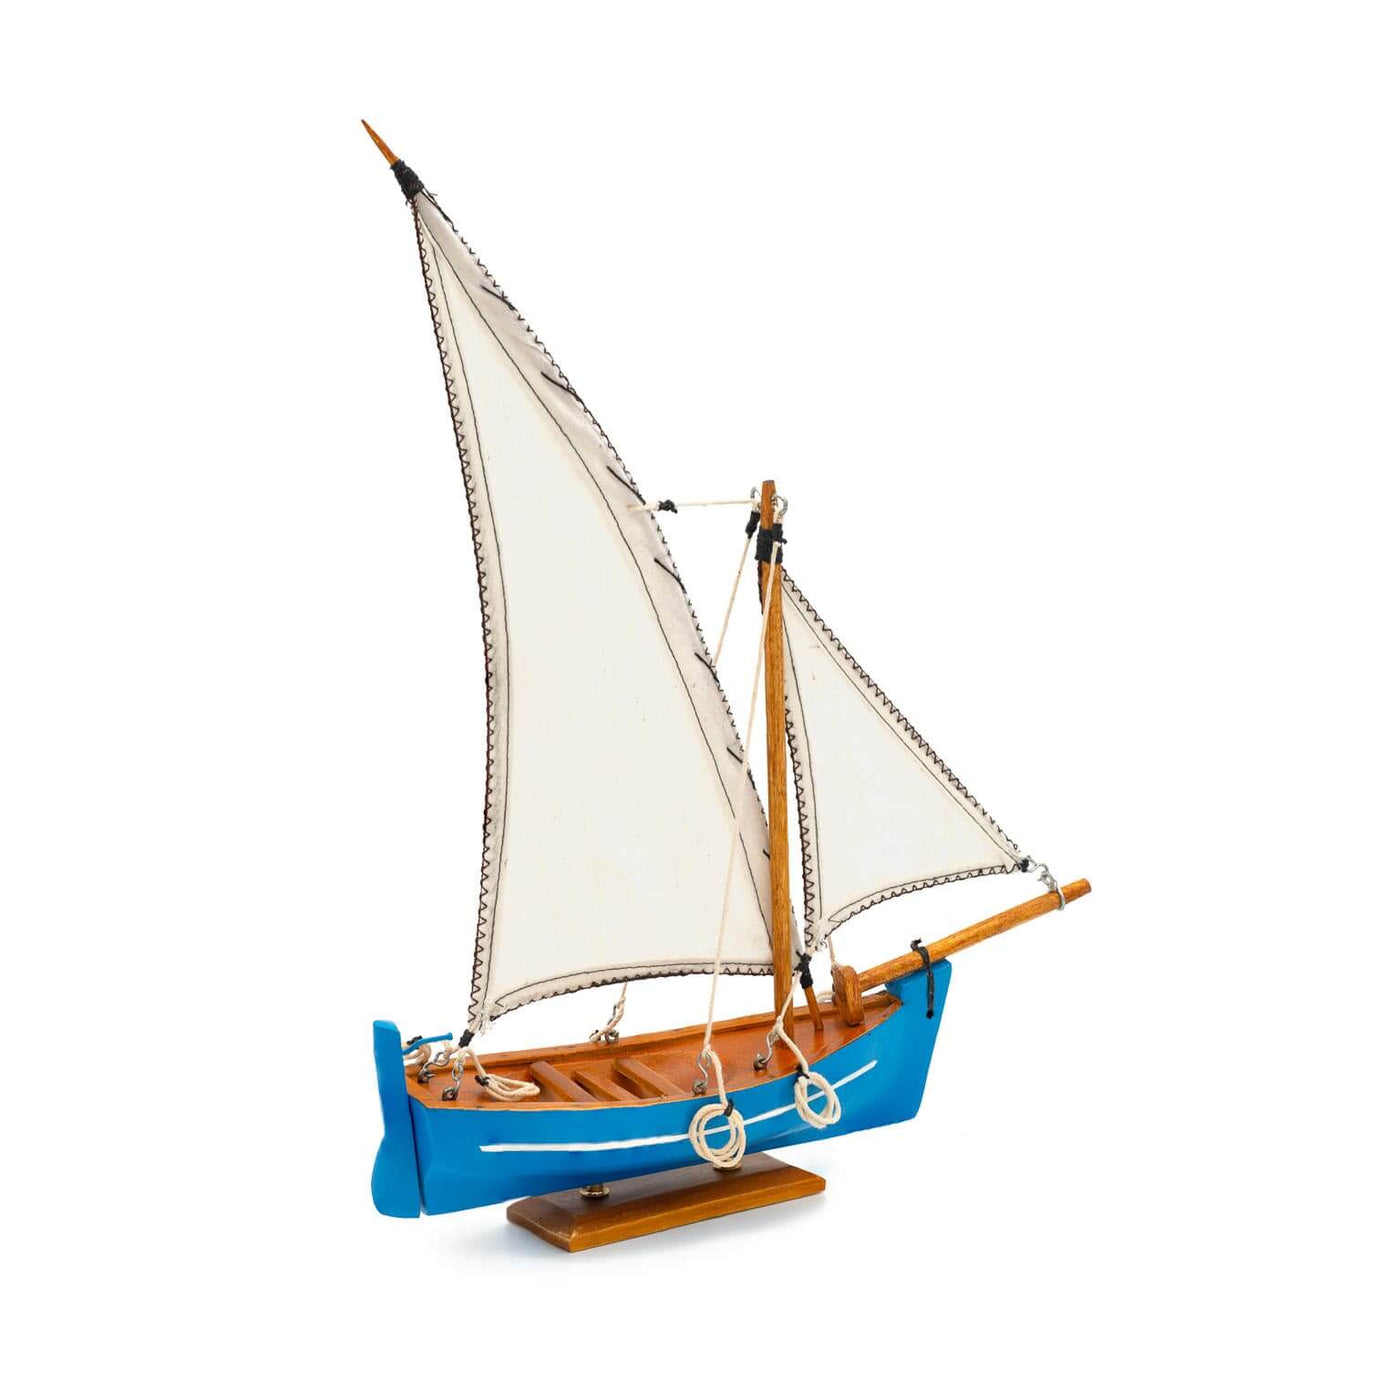 Mauritius-Handmade-Ship-Model-Small Traditional Pirogue - Blue hull with white sail-DodoMarket-Souvenirs